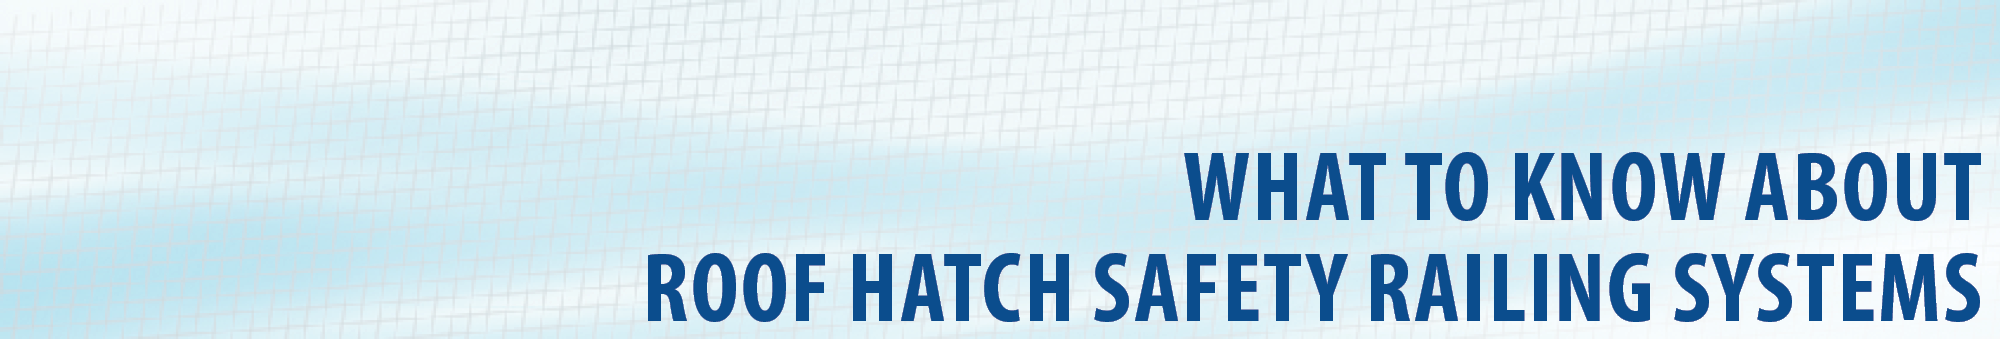 What to Know about Roof Hatch Safety Railing Systems